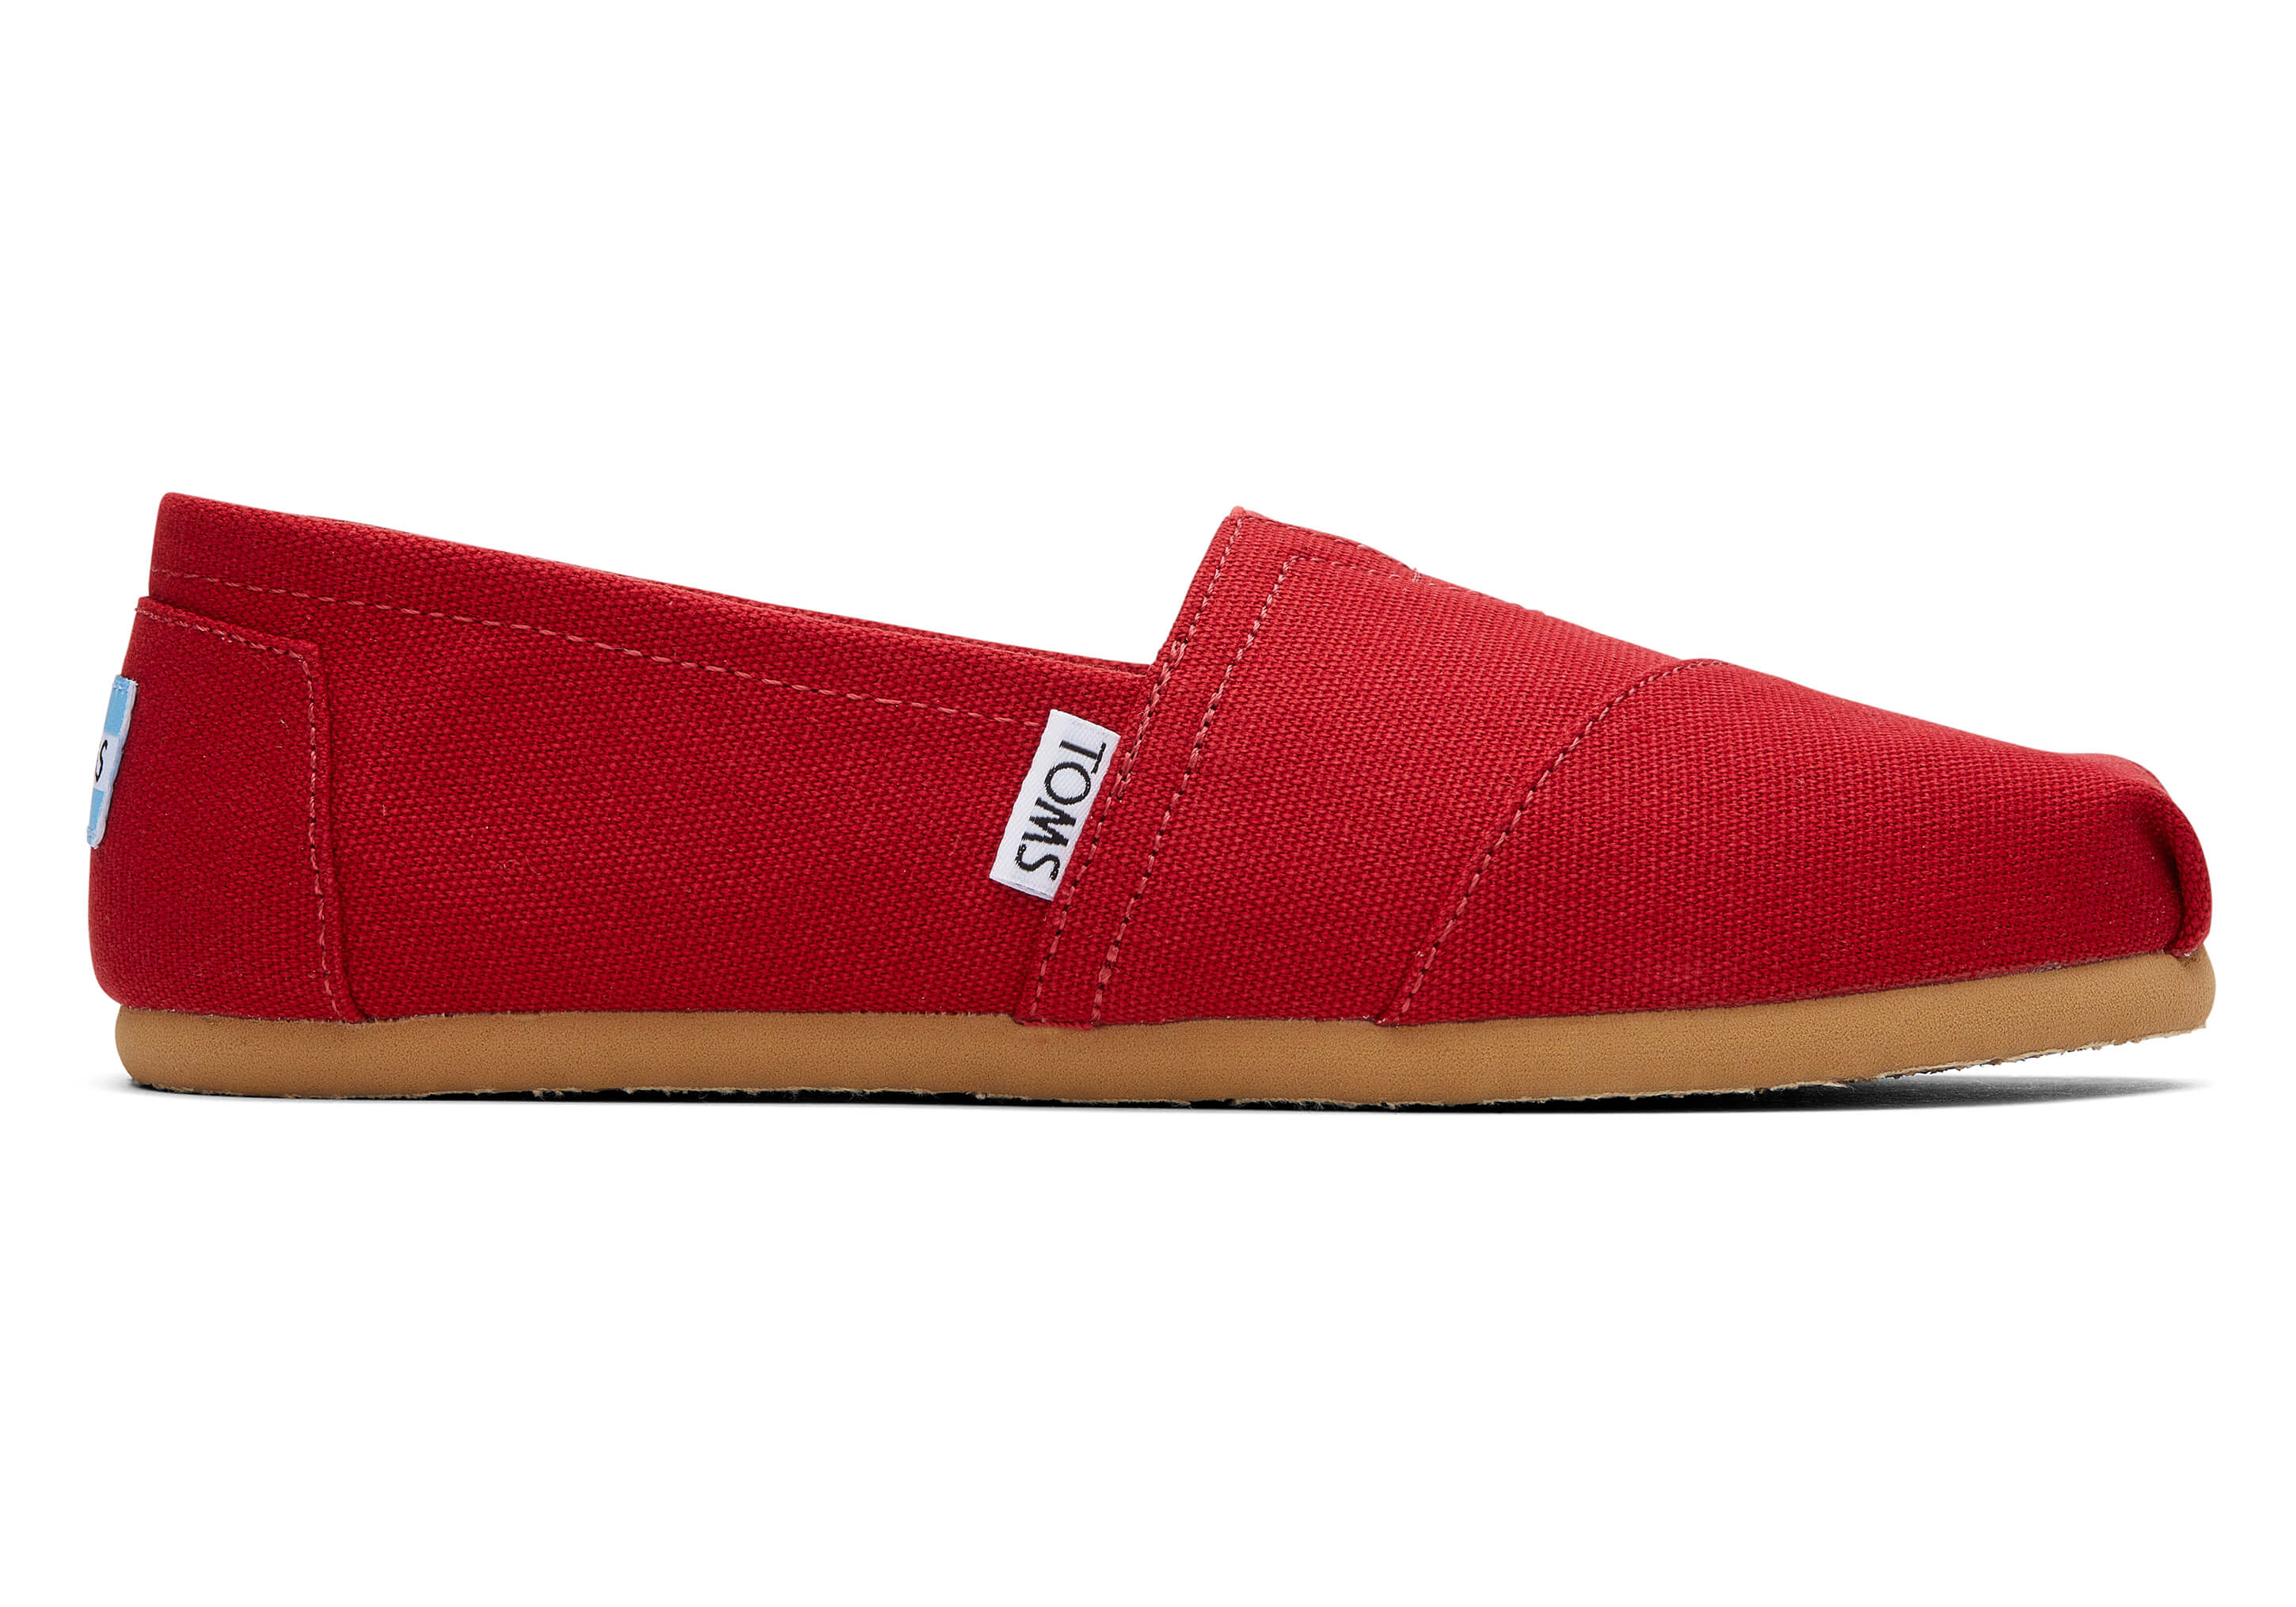 red slip on shoes womens